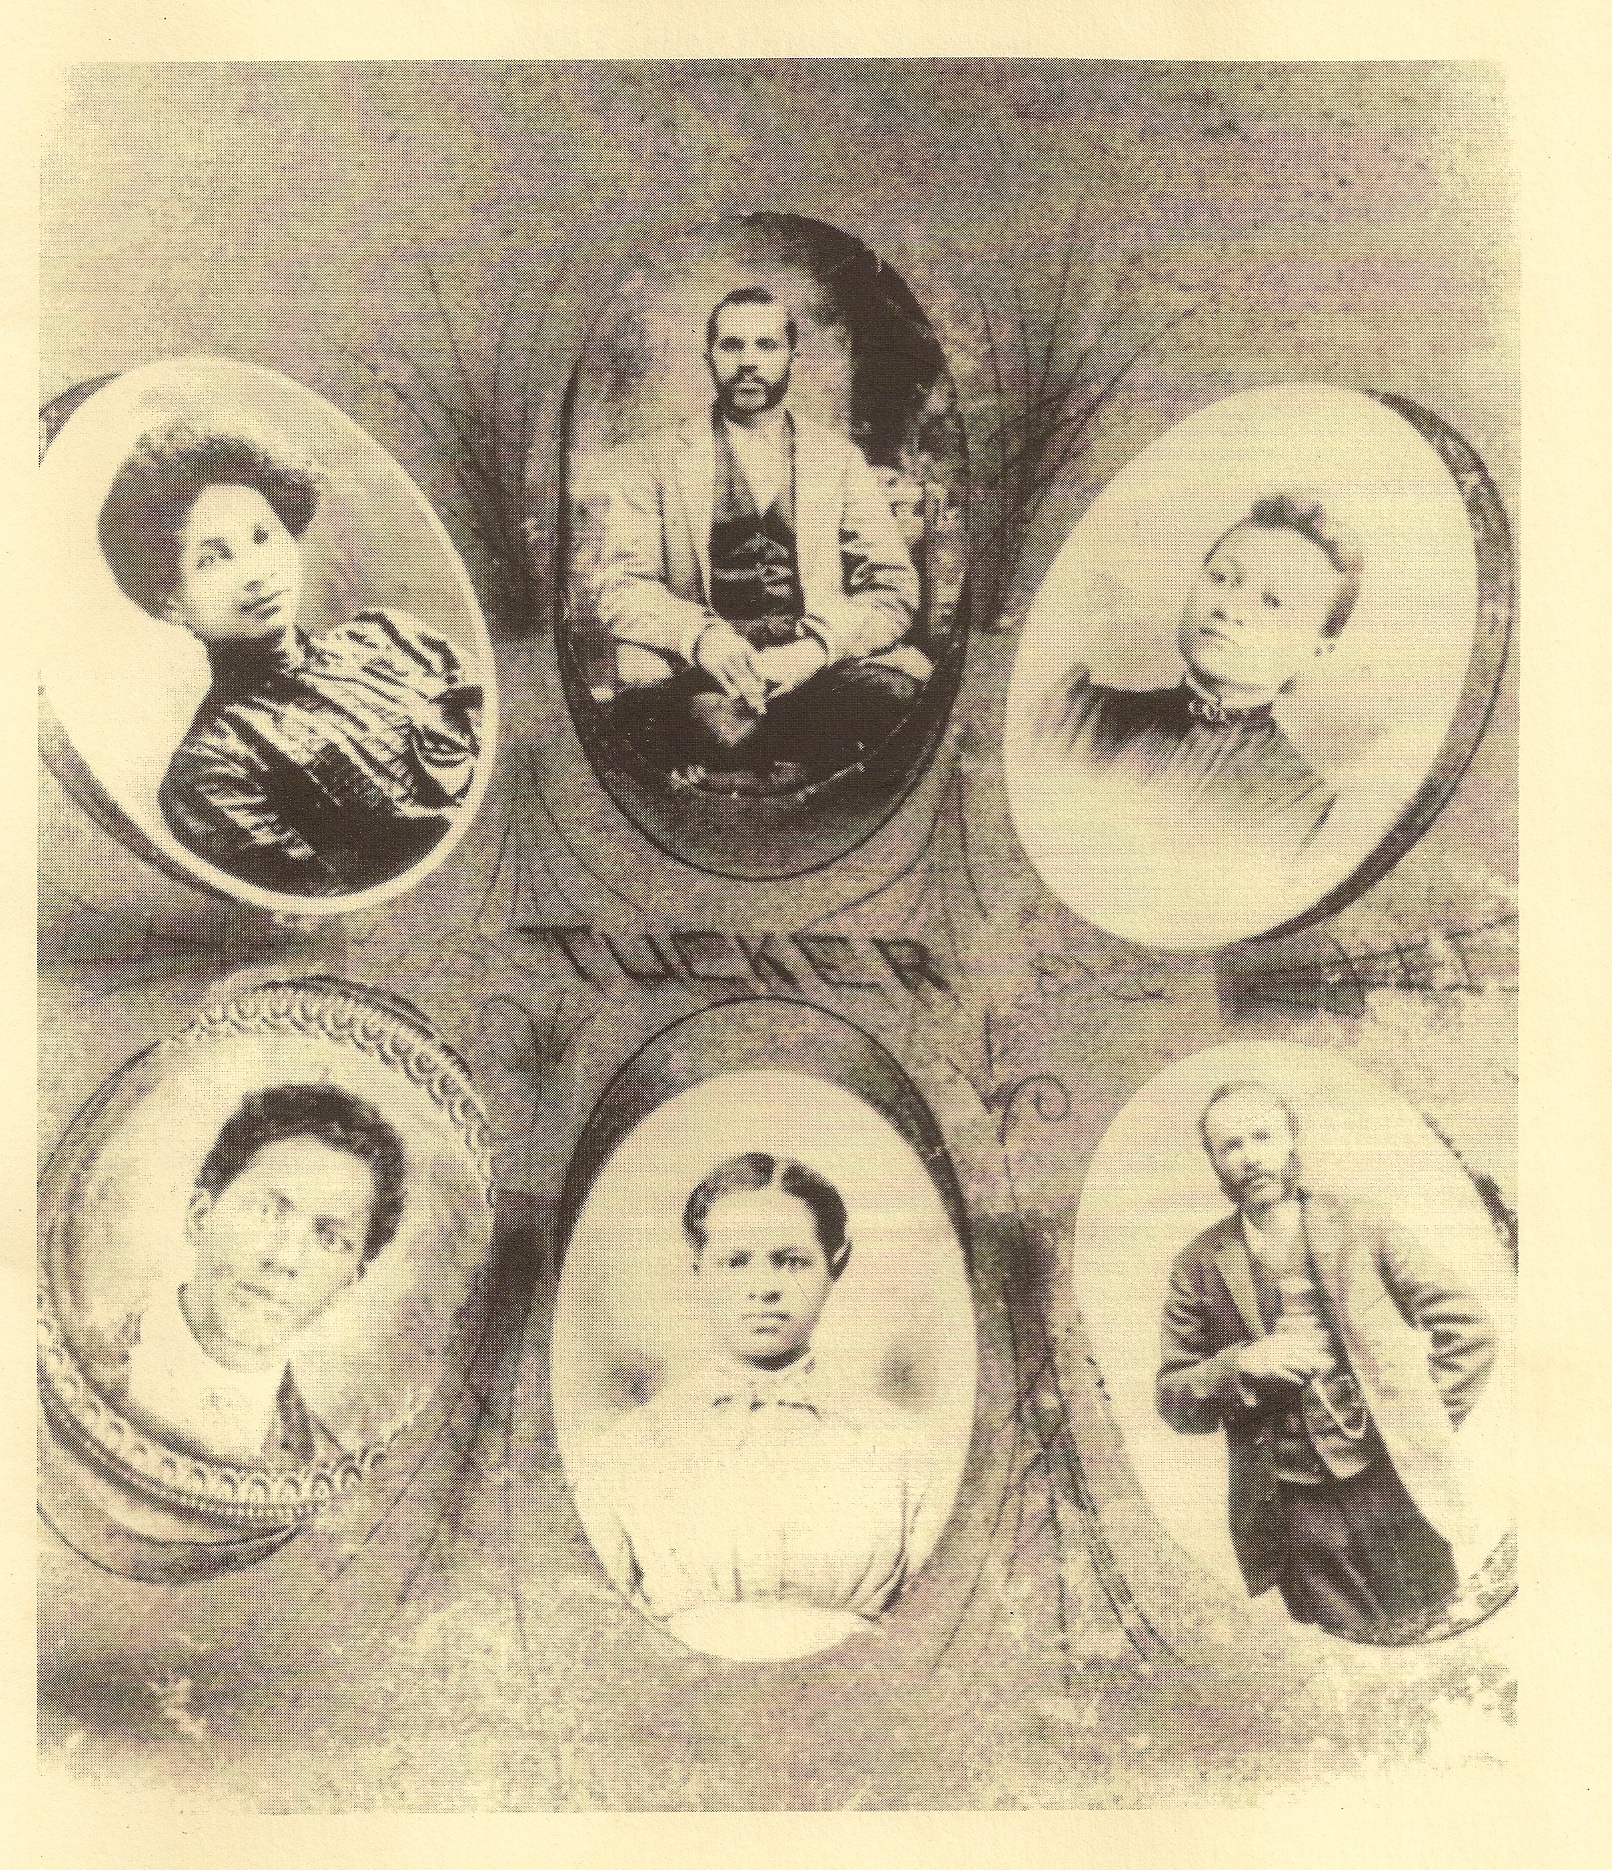 Clockwise from top: Henry, Alice, Adolphus, Brooksie, George, and Drusiller Tucker